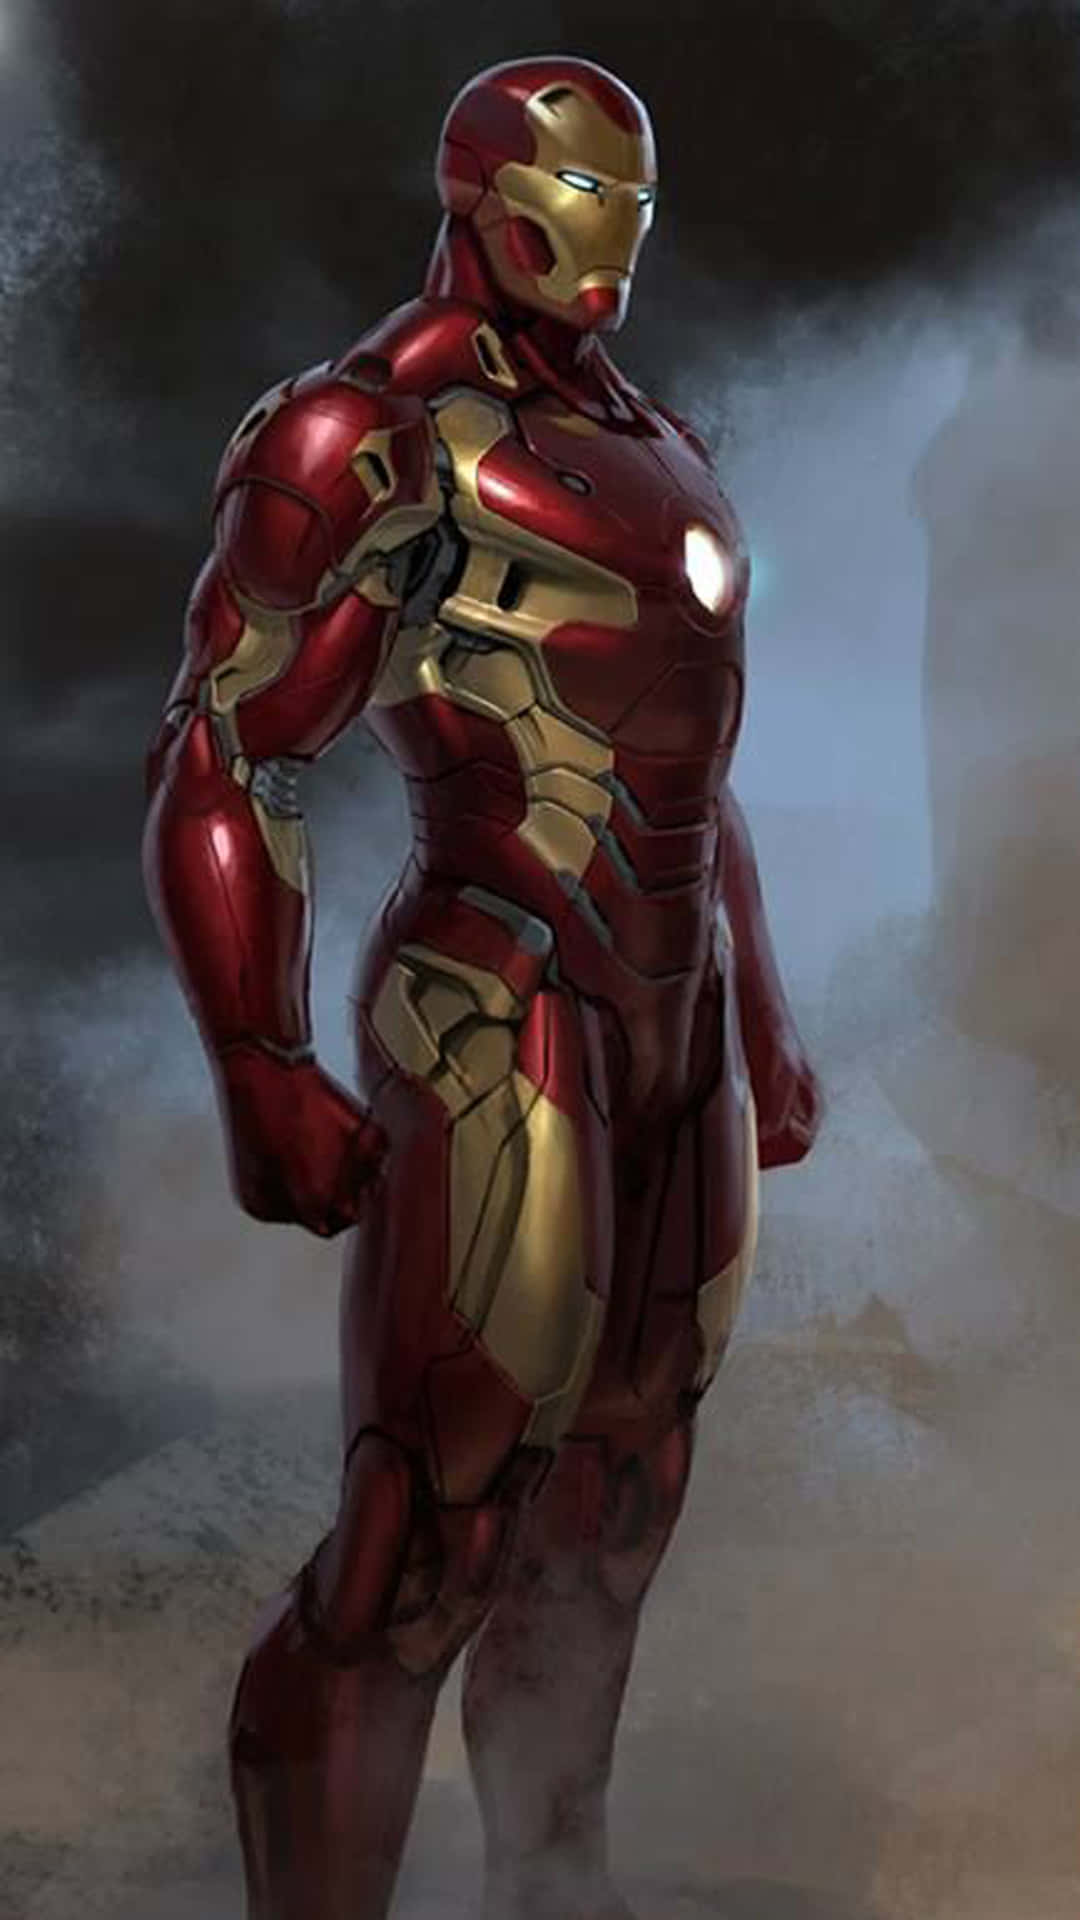 Gearing Up in Style with a Cool Iron Man iPhone Wallpaper